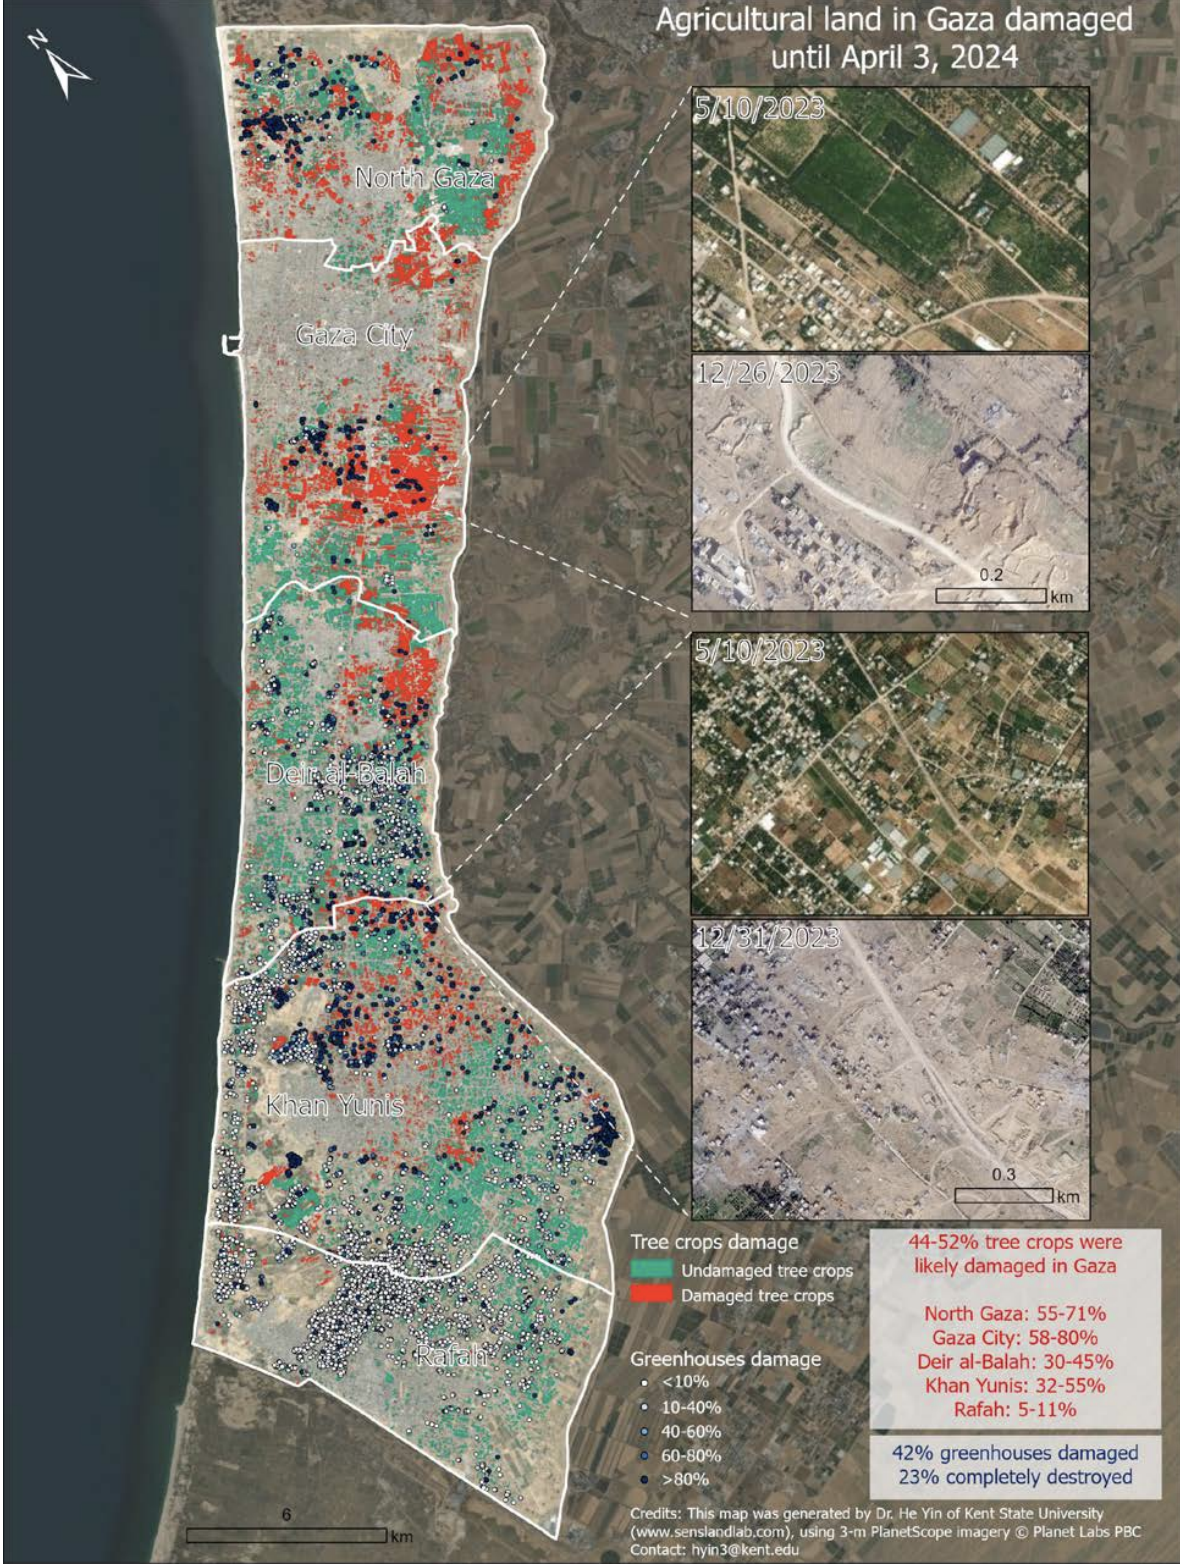 Analysis of damage to tree crops, greenhouses and other agriculture in Gaza published by UNEP. 